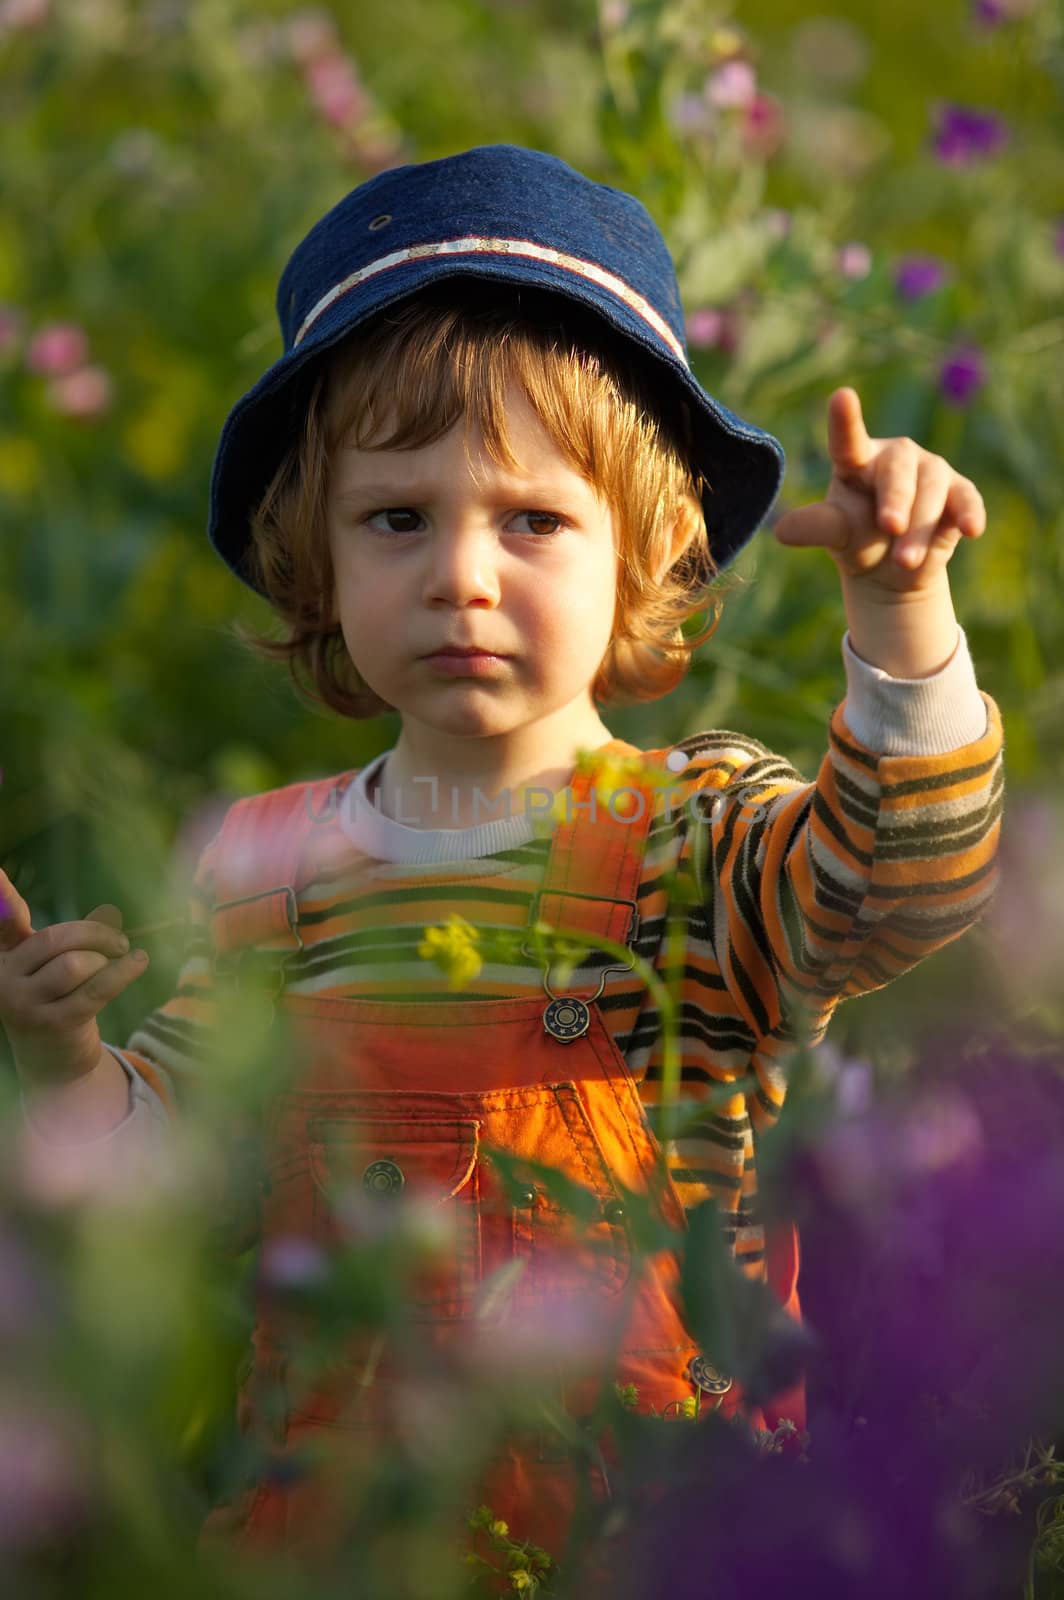 Little boy in a flowers field at sunset by ecobo